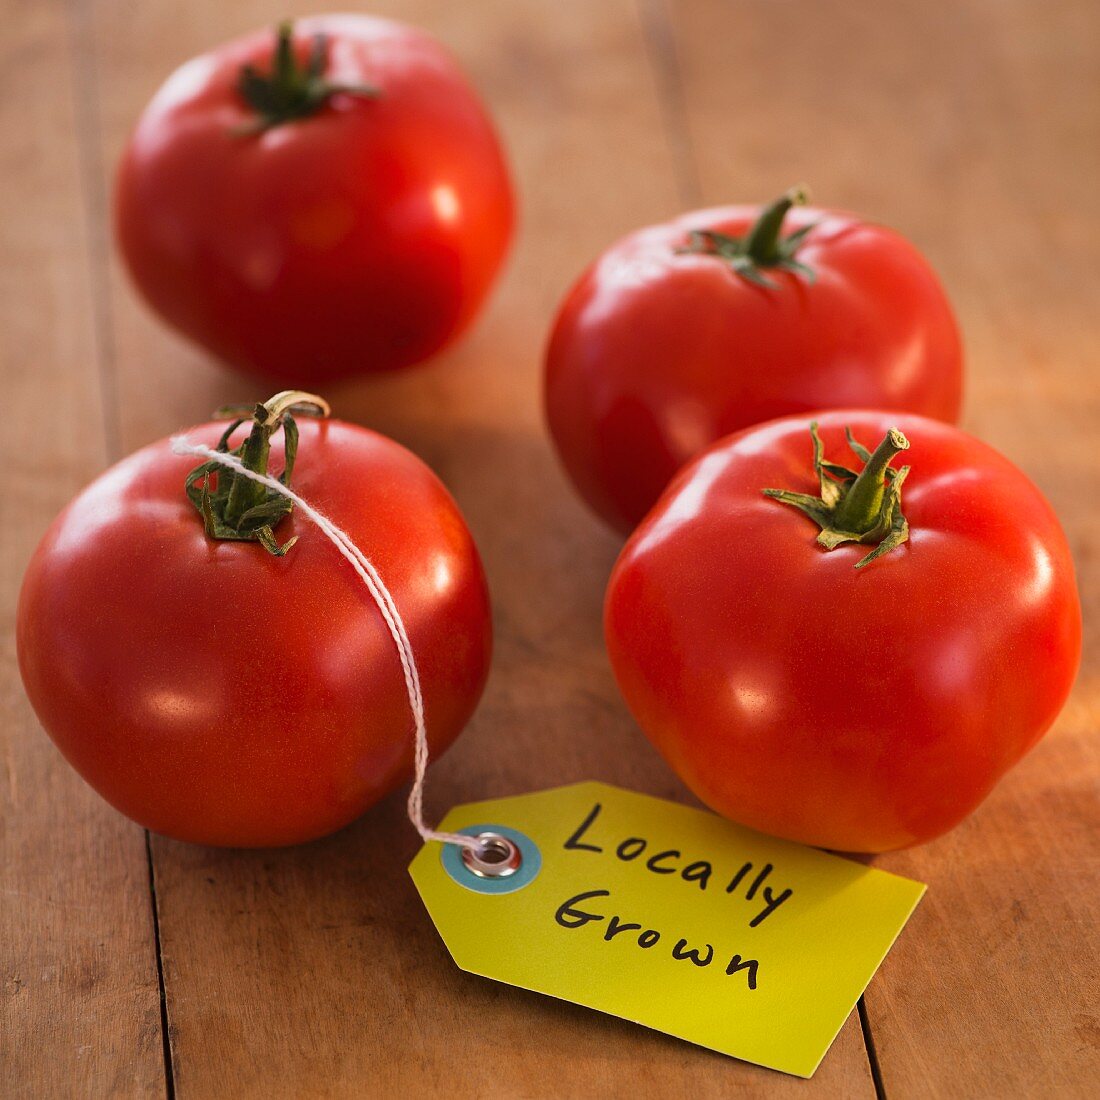 Locally grown tomatoes with label